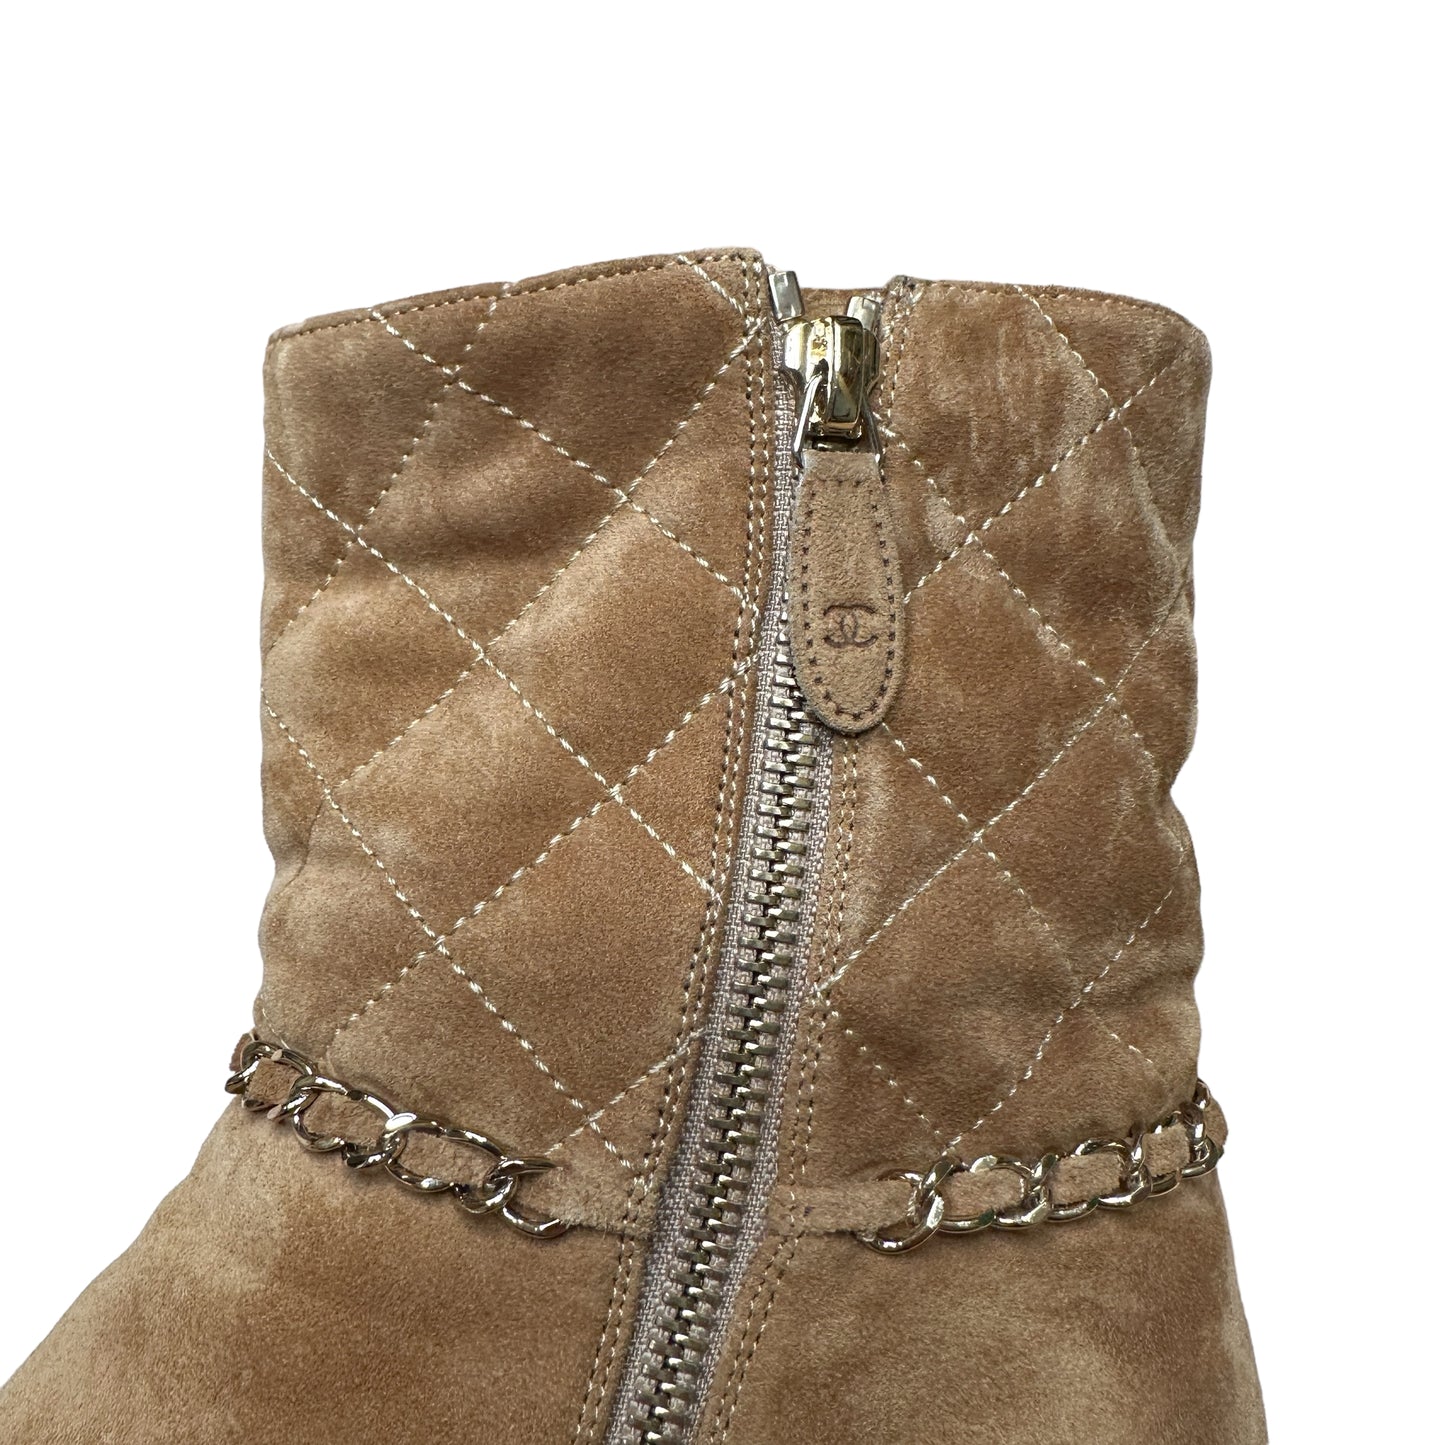 Brown Suede Logo Boots - 8